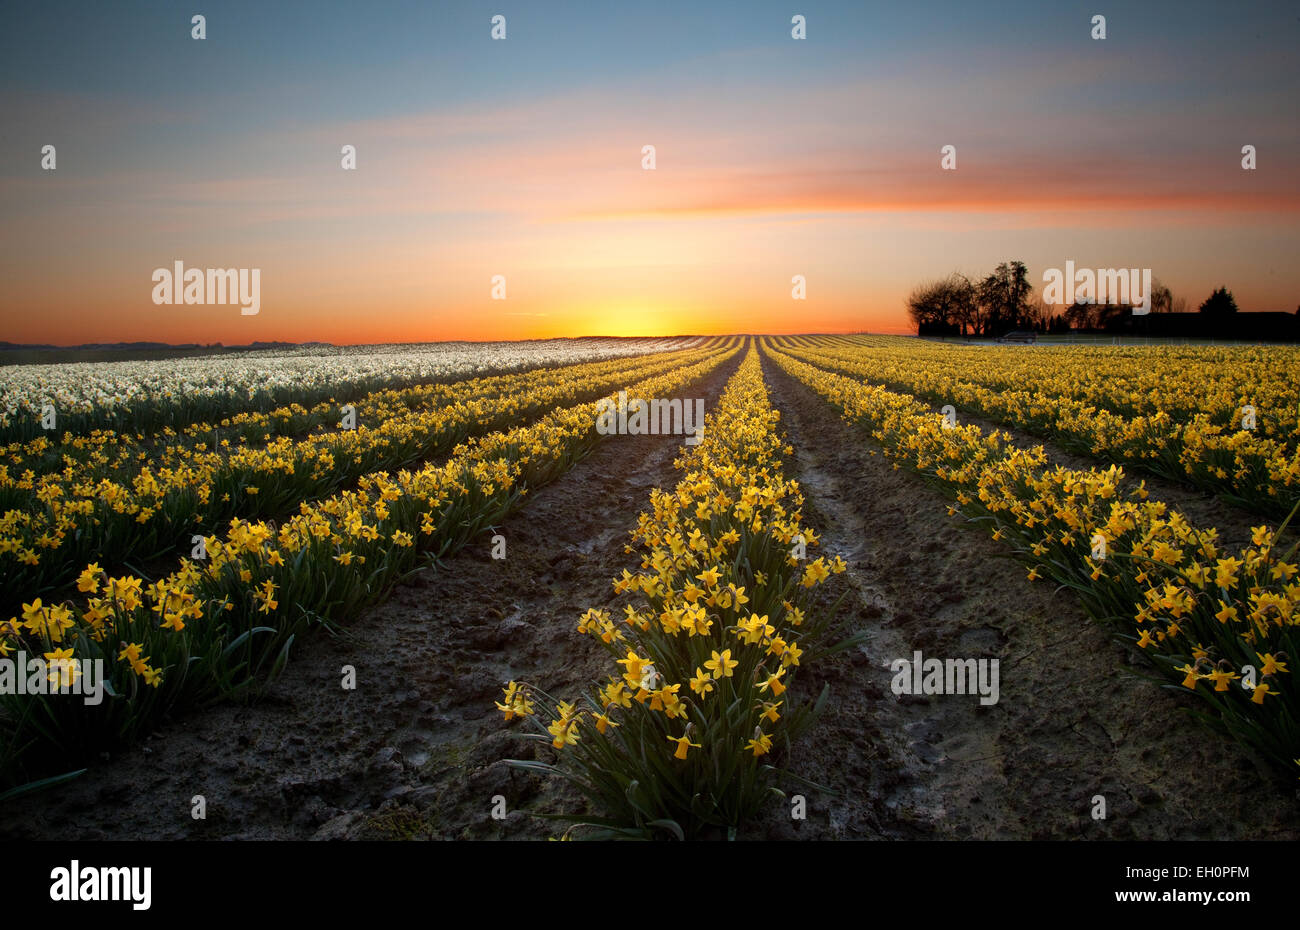 Daffodil flowers bloom in a field at the start of the annual La Conner Daffodil Festival in La Conner Washington, USA. Stock Photo